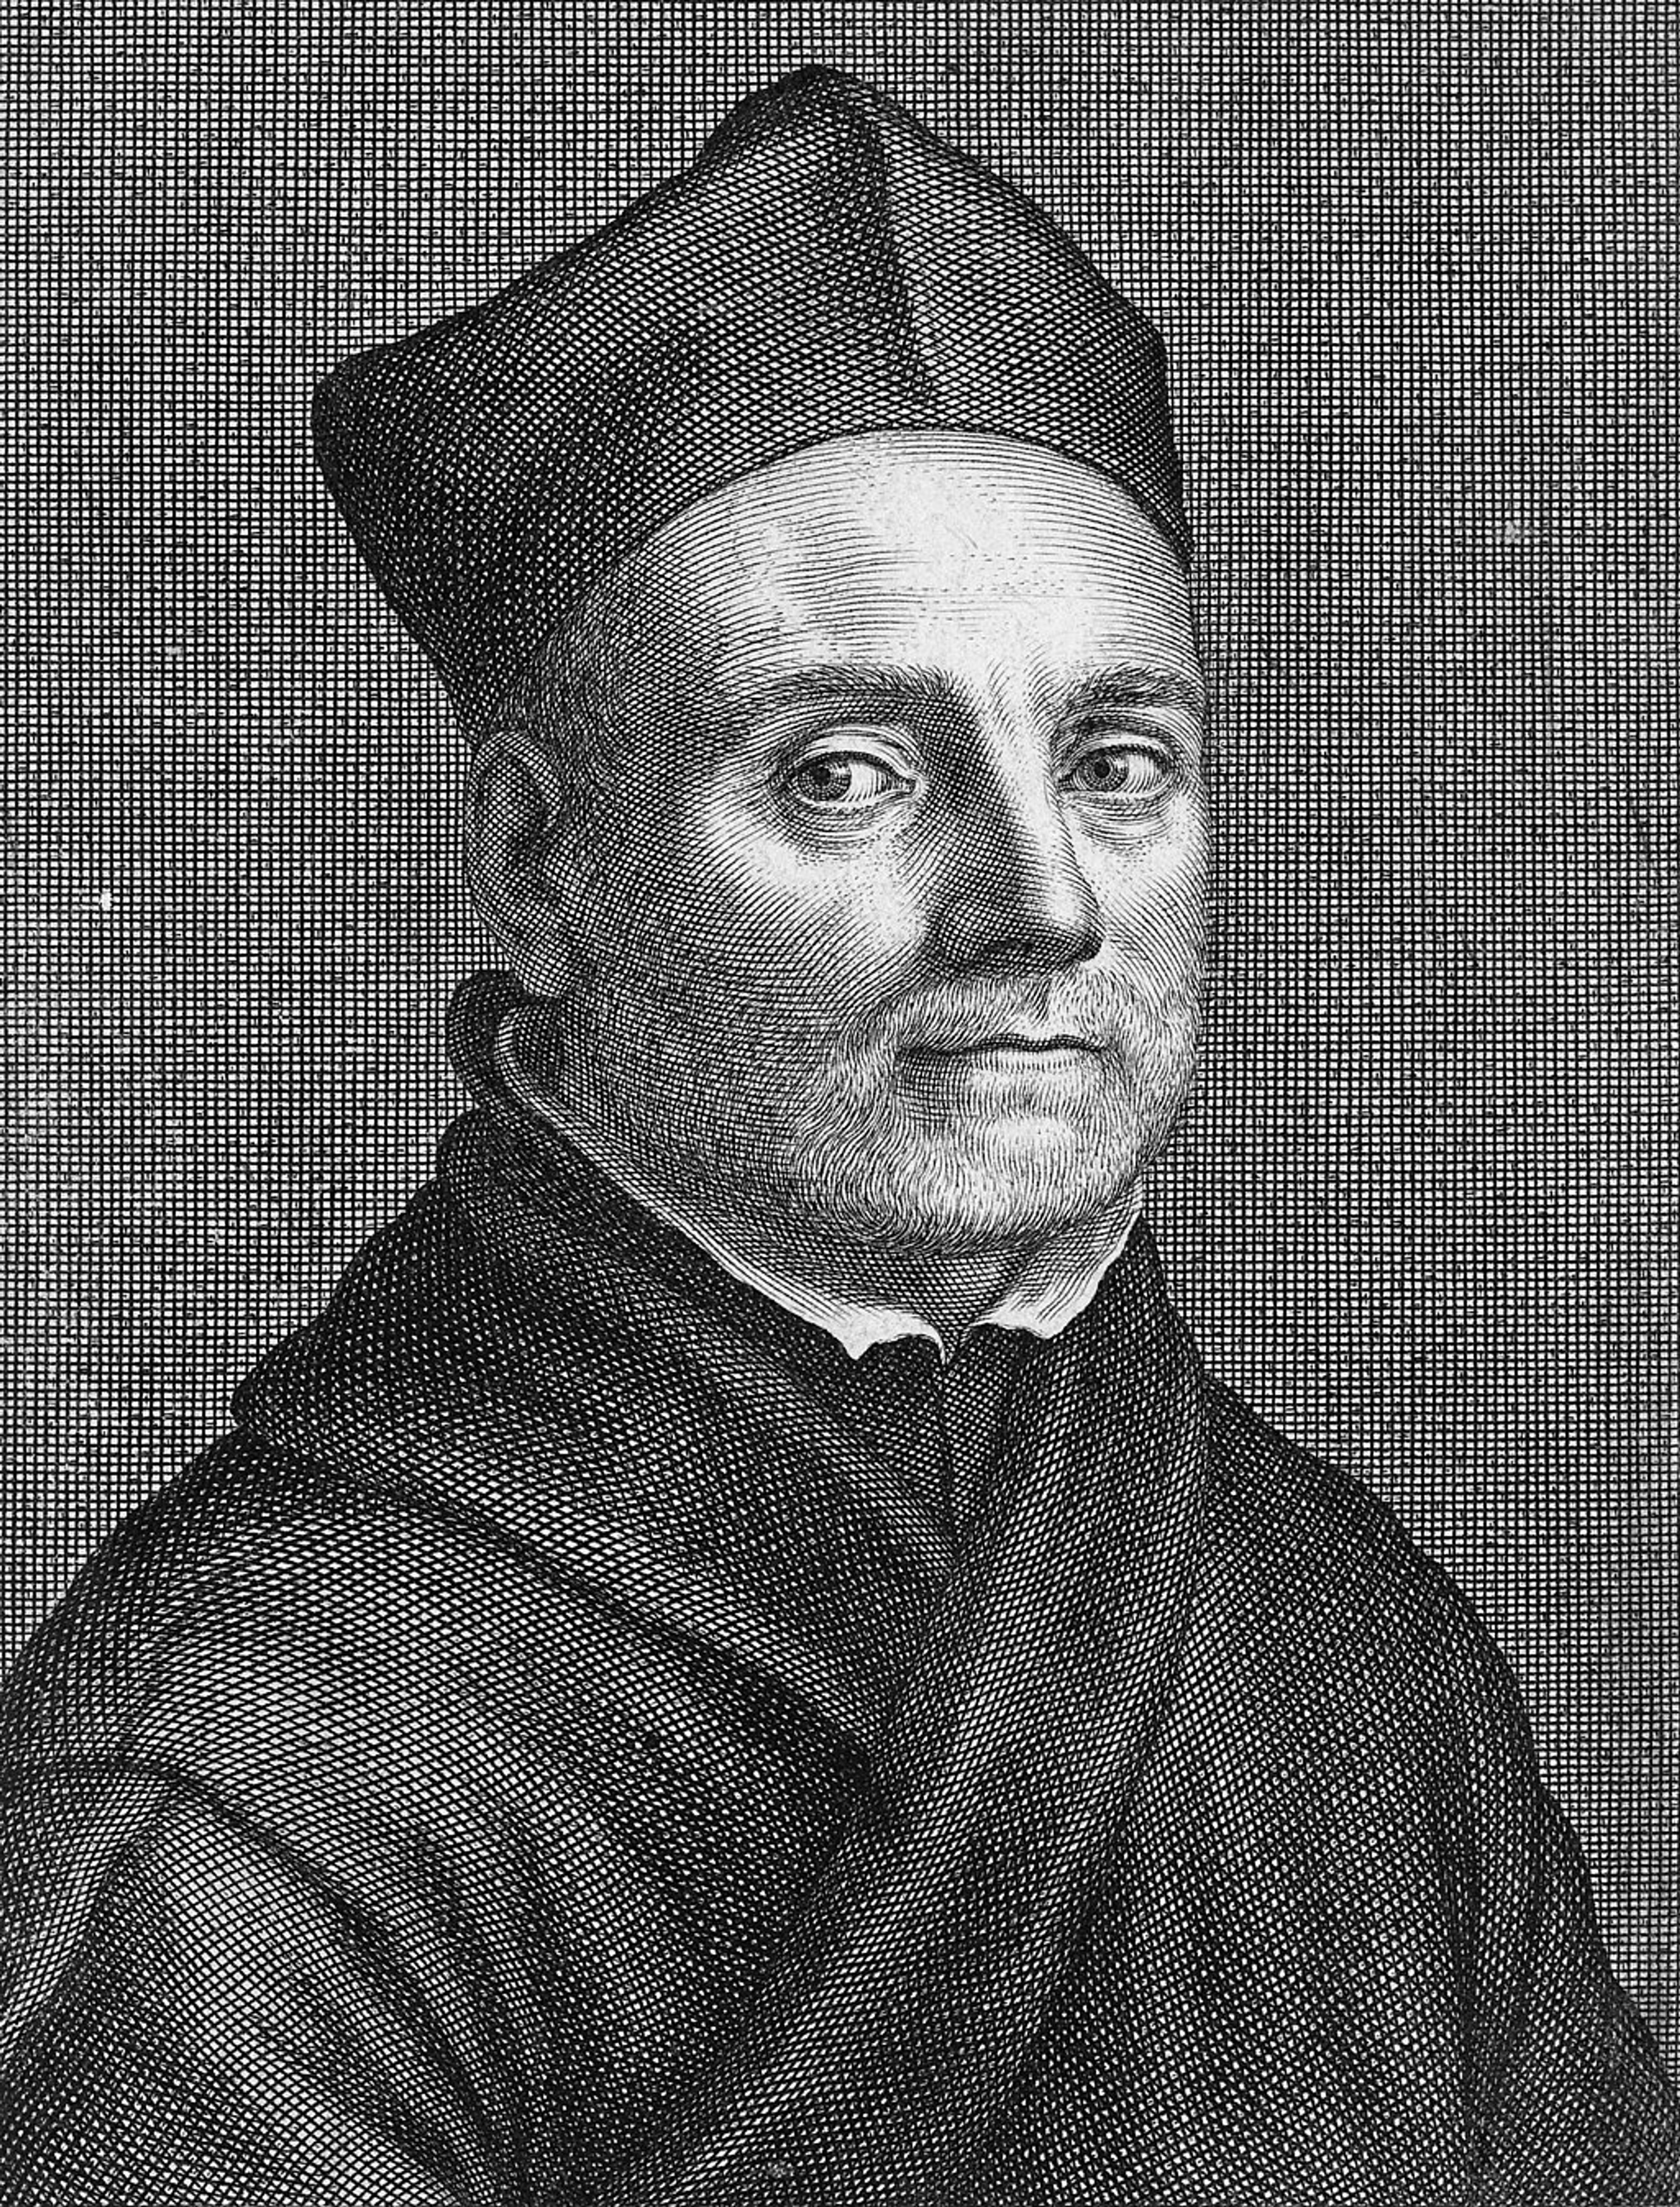 Black and white portrait of Athanasius Kircher, scholar of medicine, history, physics, astronomy, mathematics, linguistics, and comparative musicology, wearing robes.